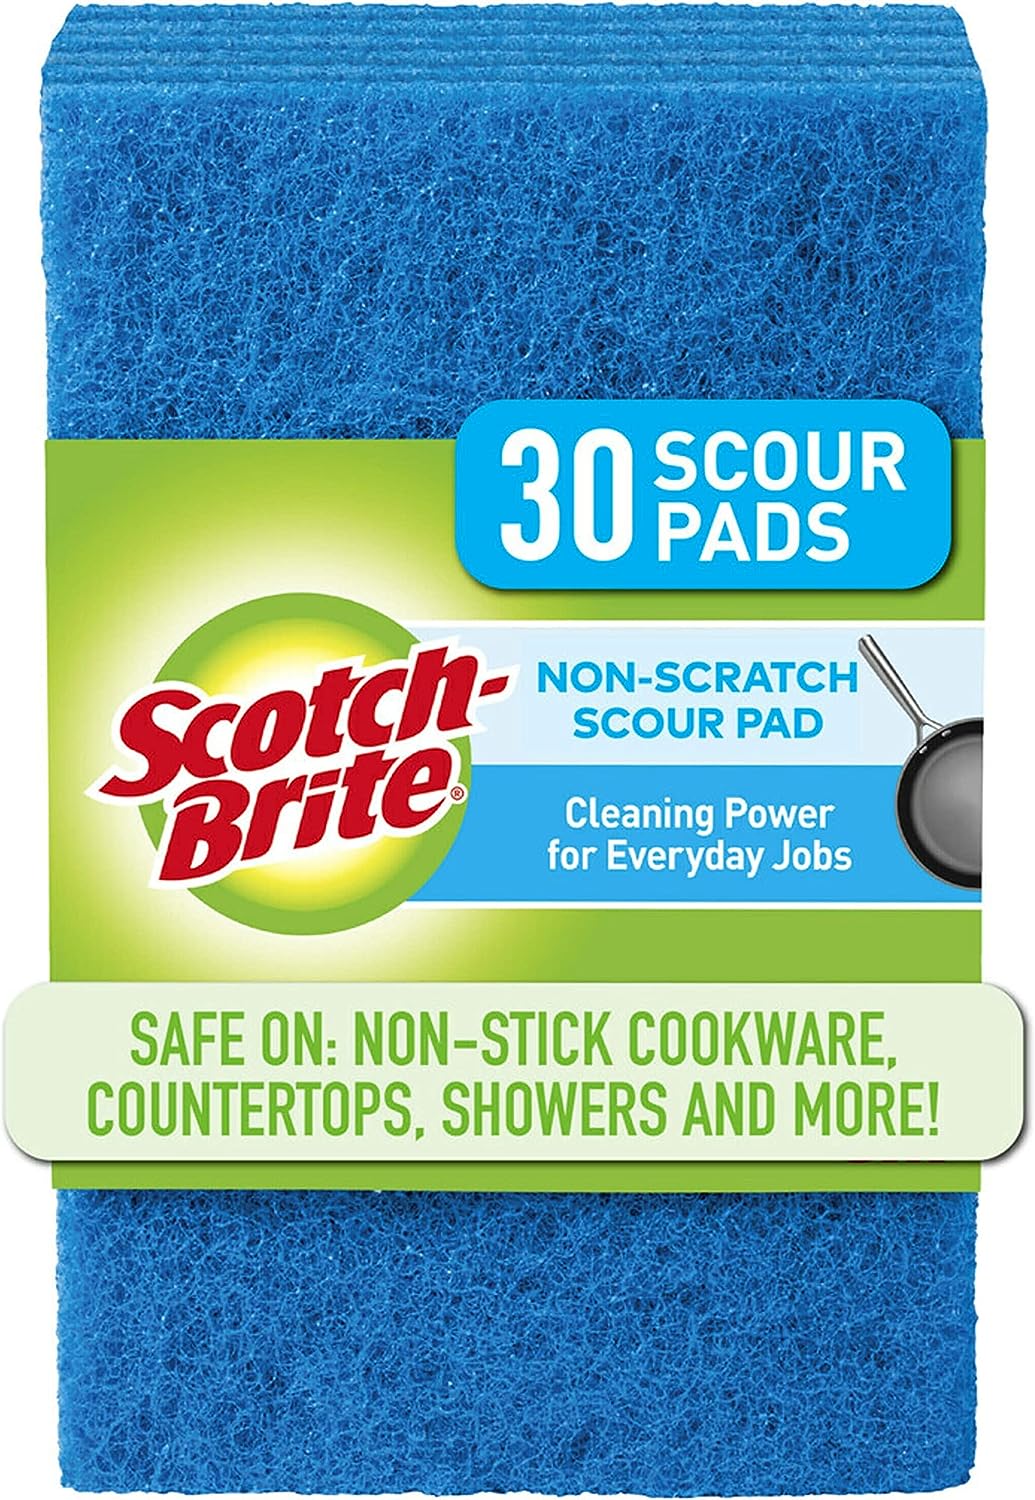 Scotch-Brite Non-Scratch Scour Pads, Scouring Pads for Kitchen and Dish Cleaning, 30 Pads